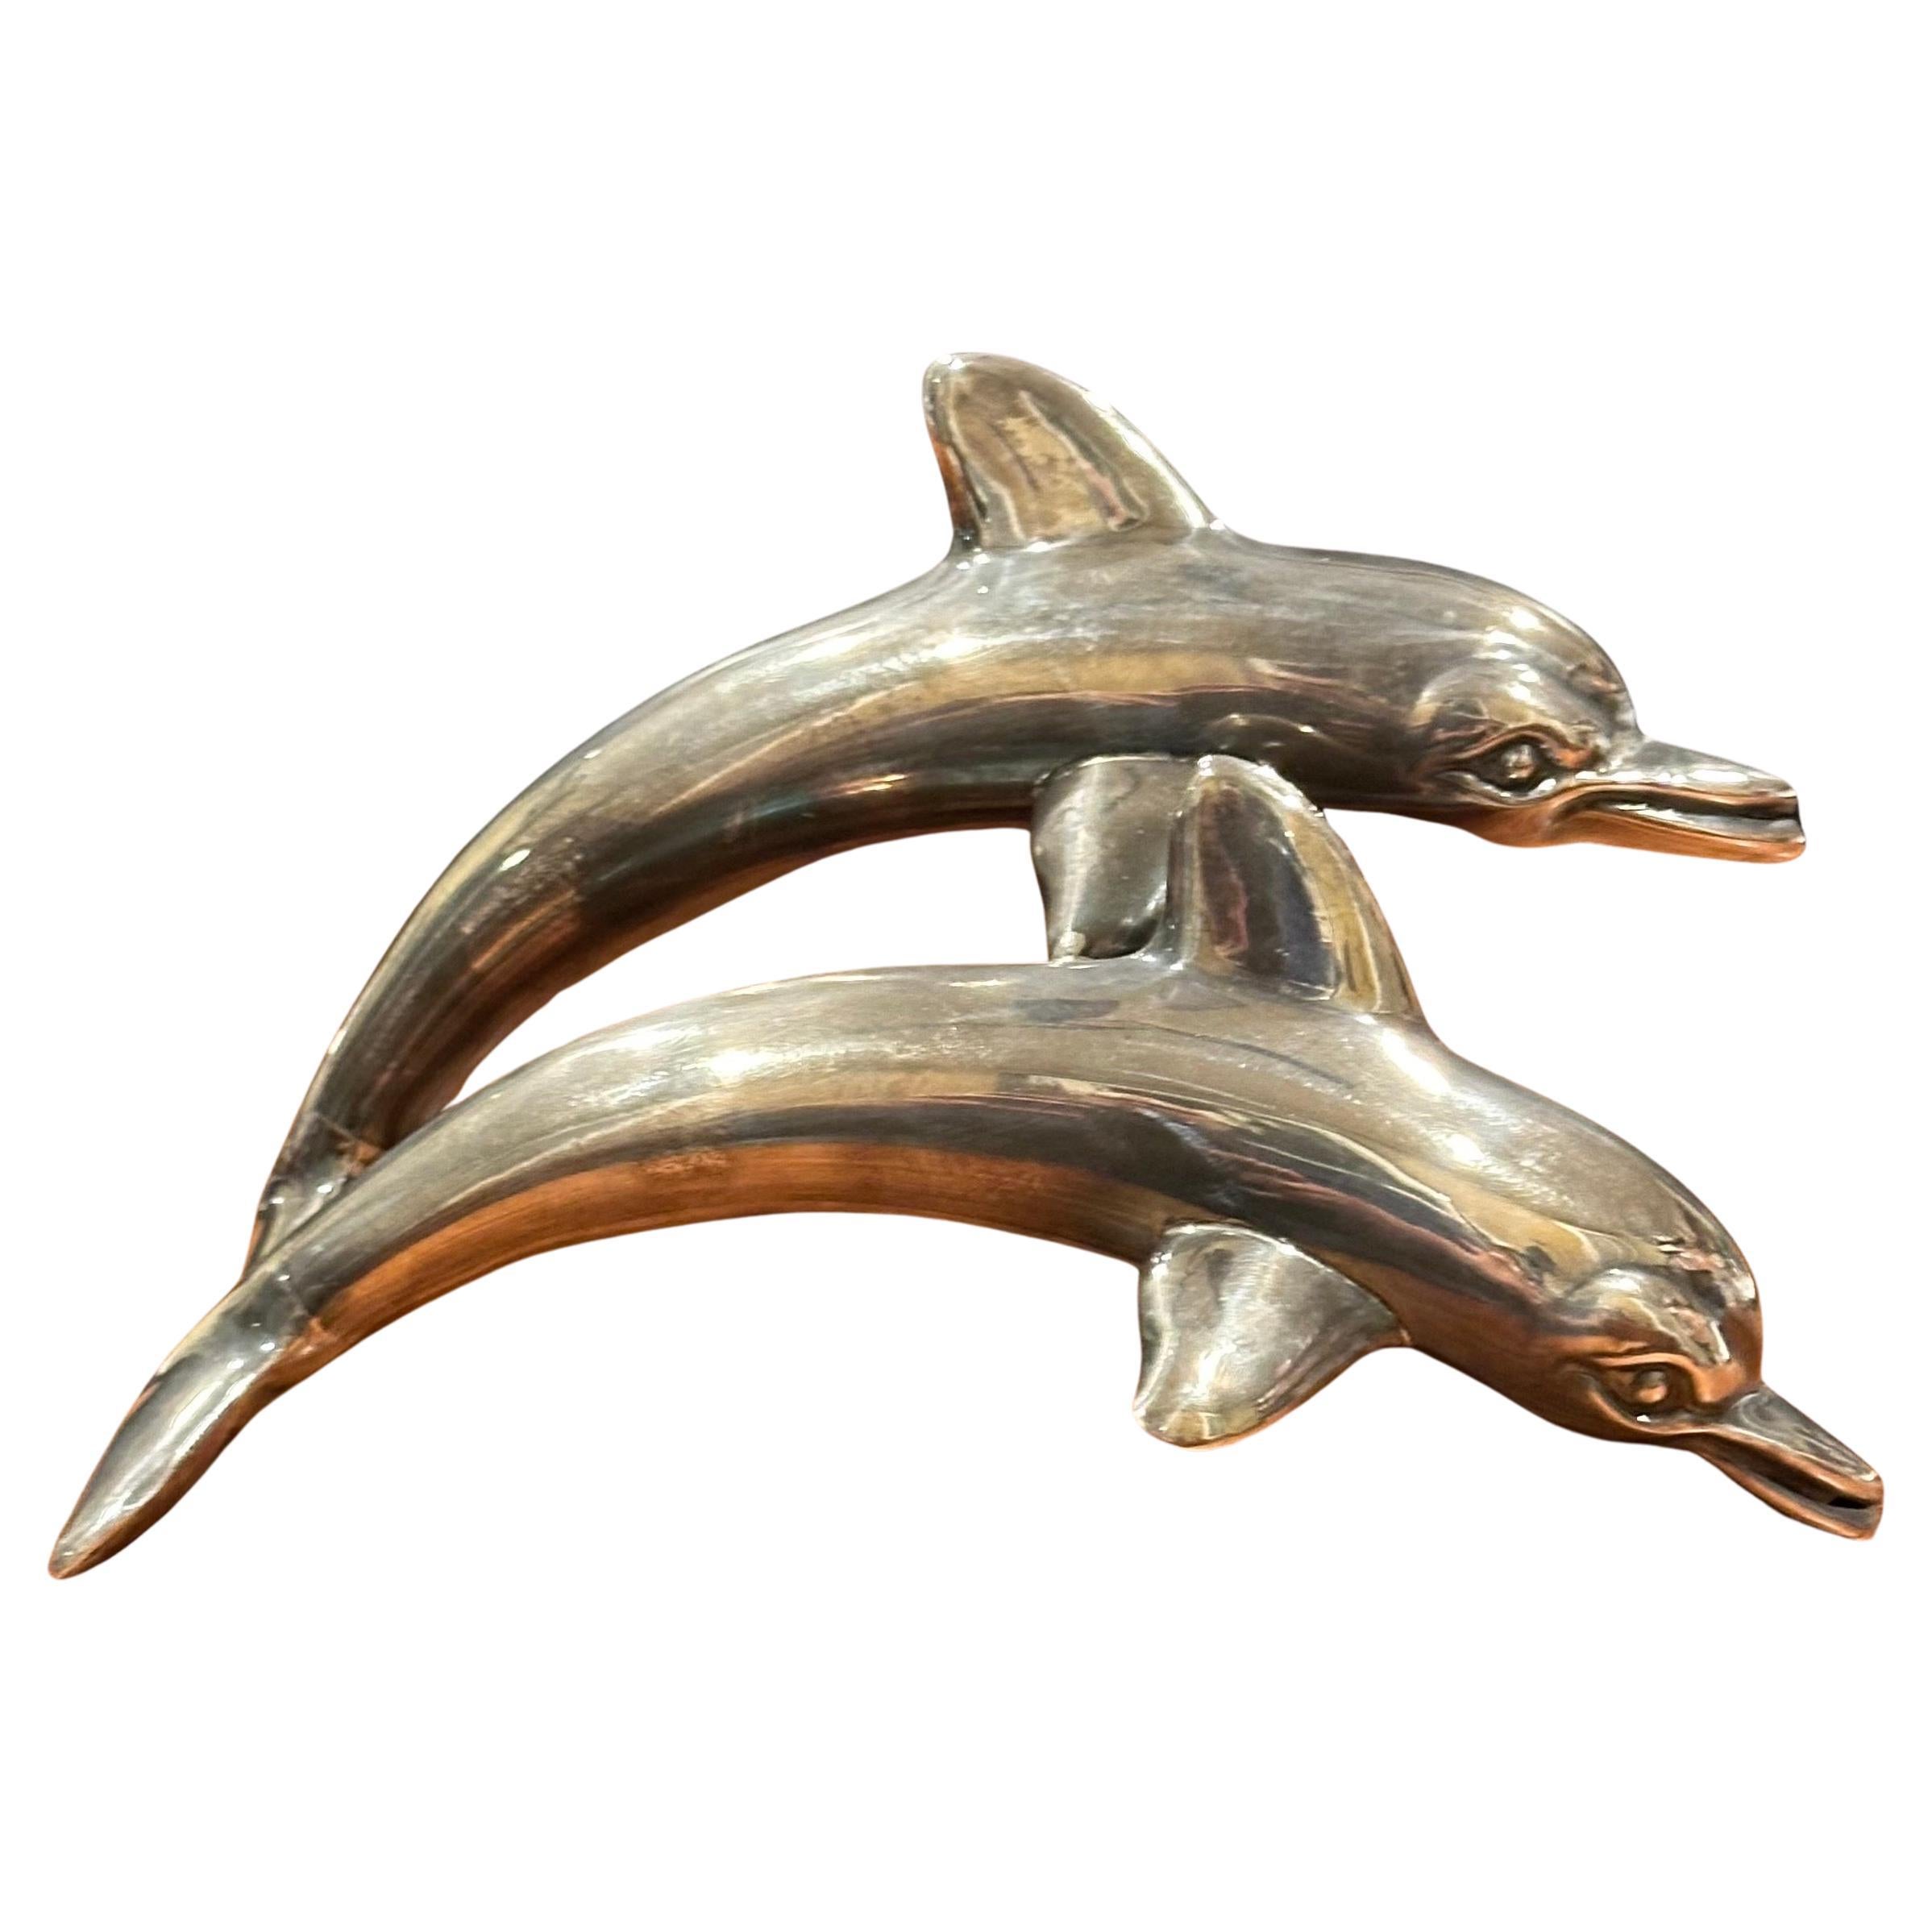 A very nice mid-century sterling silver dual dolphin pod sculpture, circa 1970s. The piece is in very good vintage condition with a nice patina and measures 7